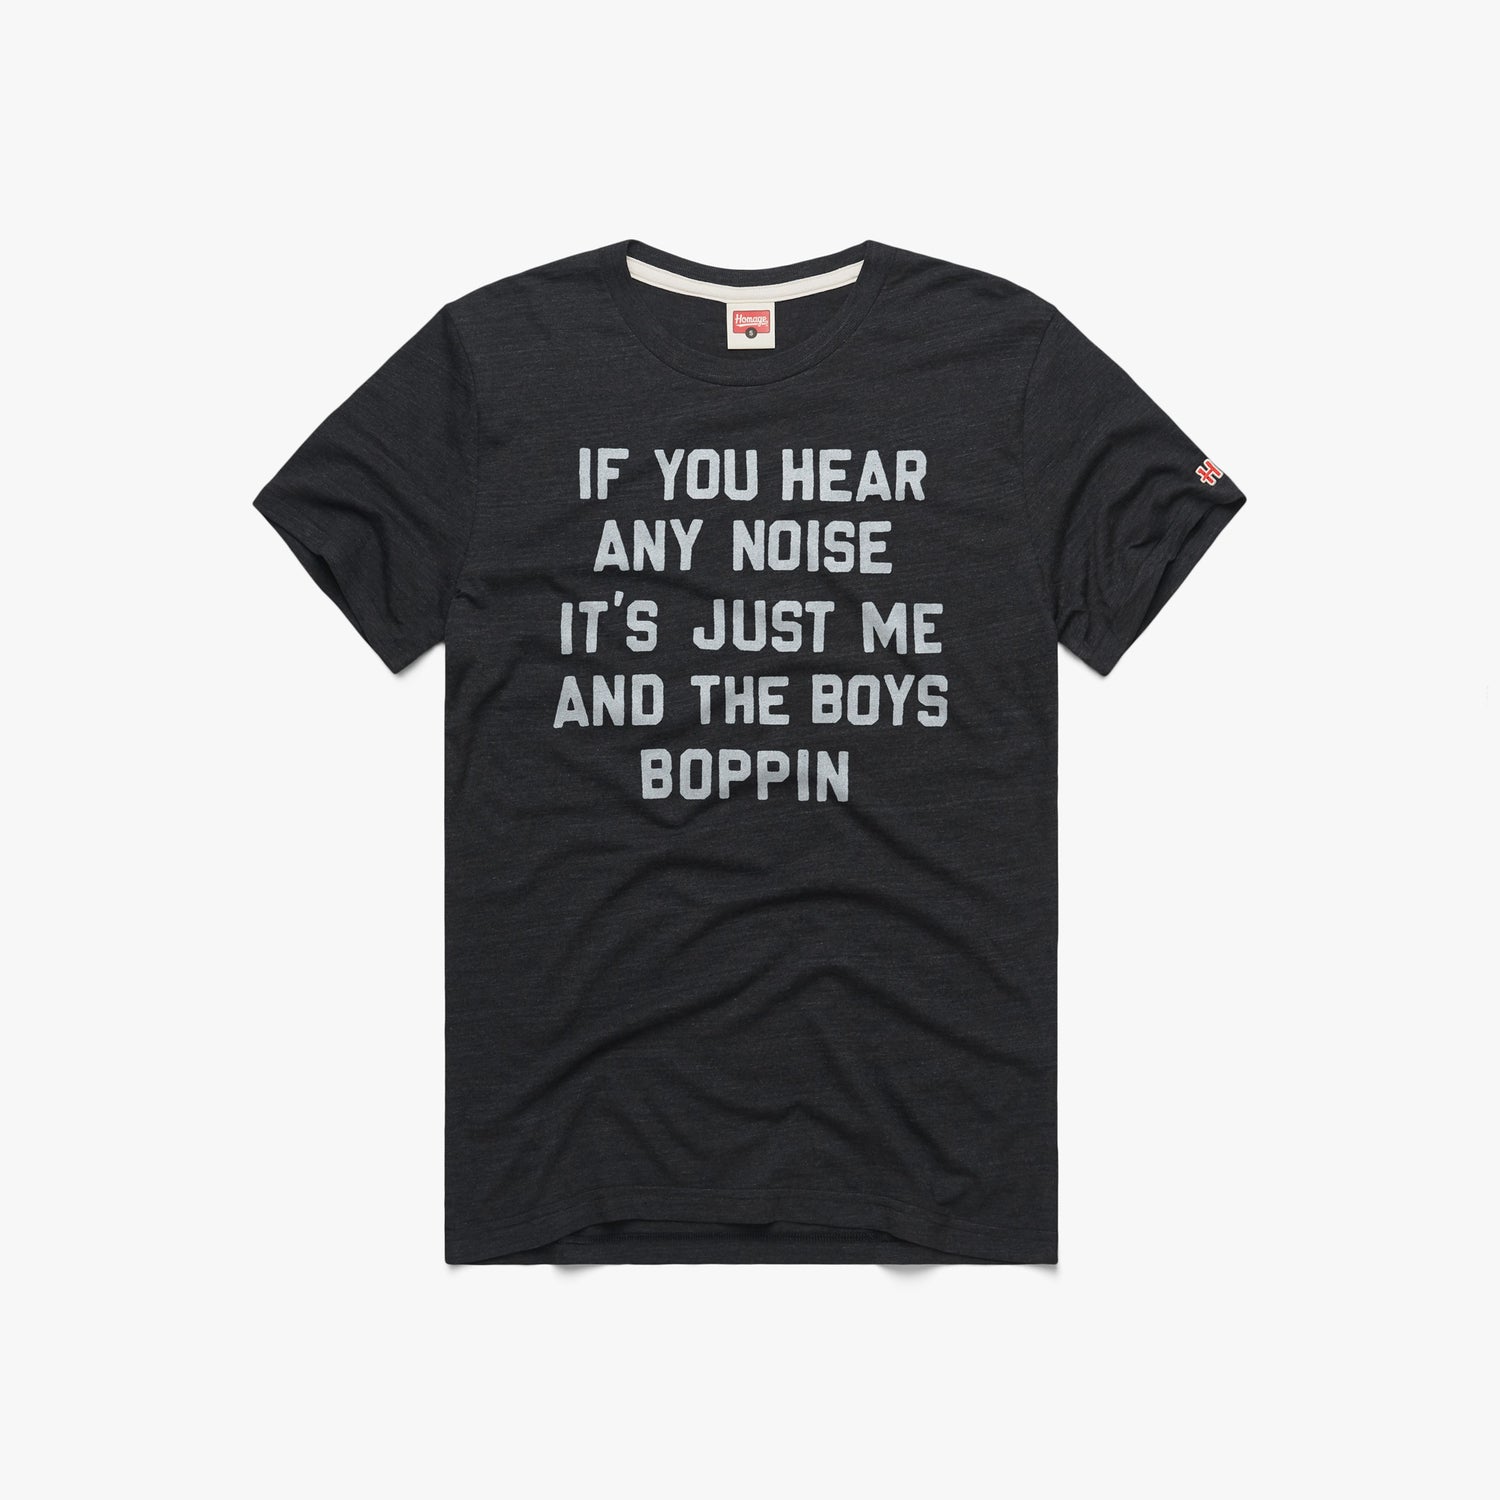 Me and The Boys Boppin T-Shirt from Homage. | Charcoal | Vintage Apparel from Homage.